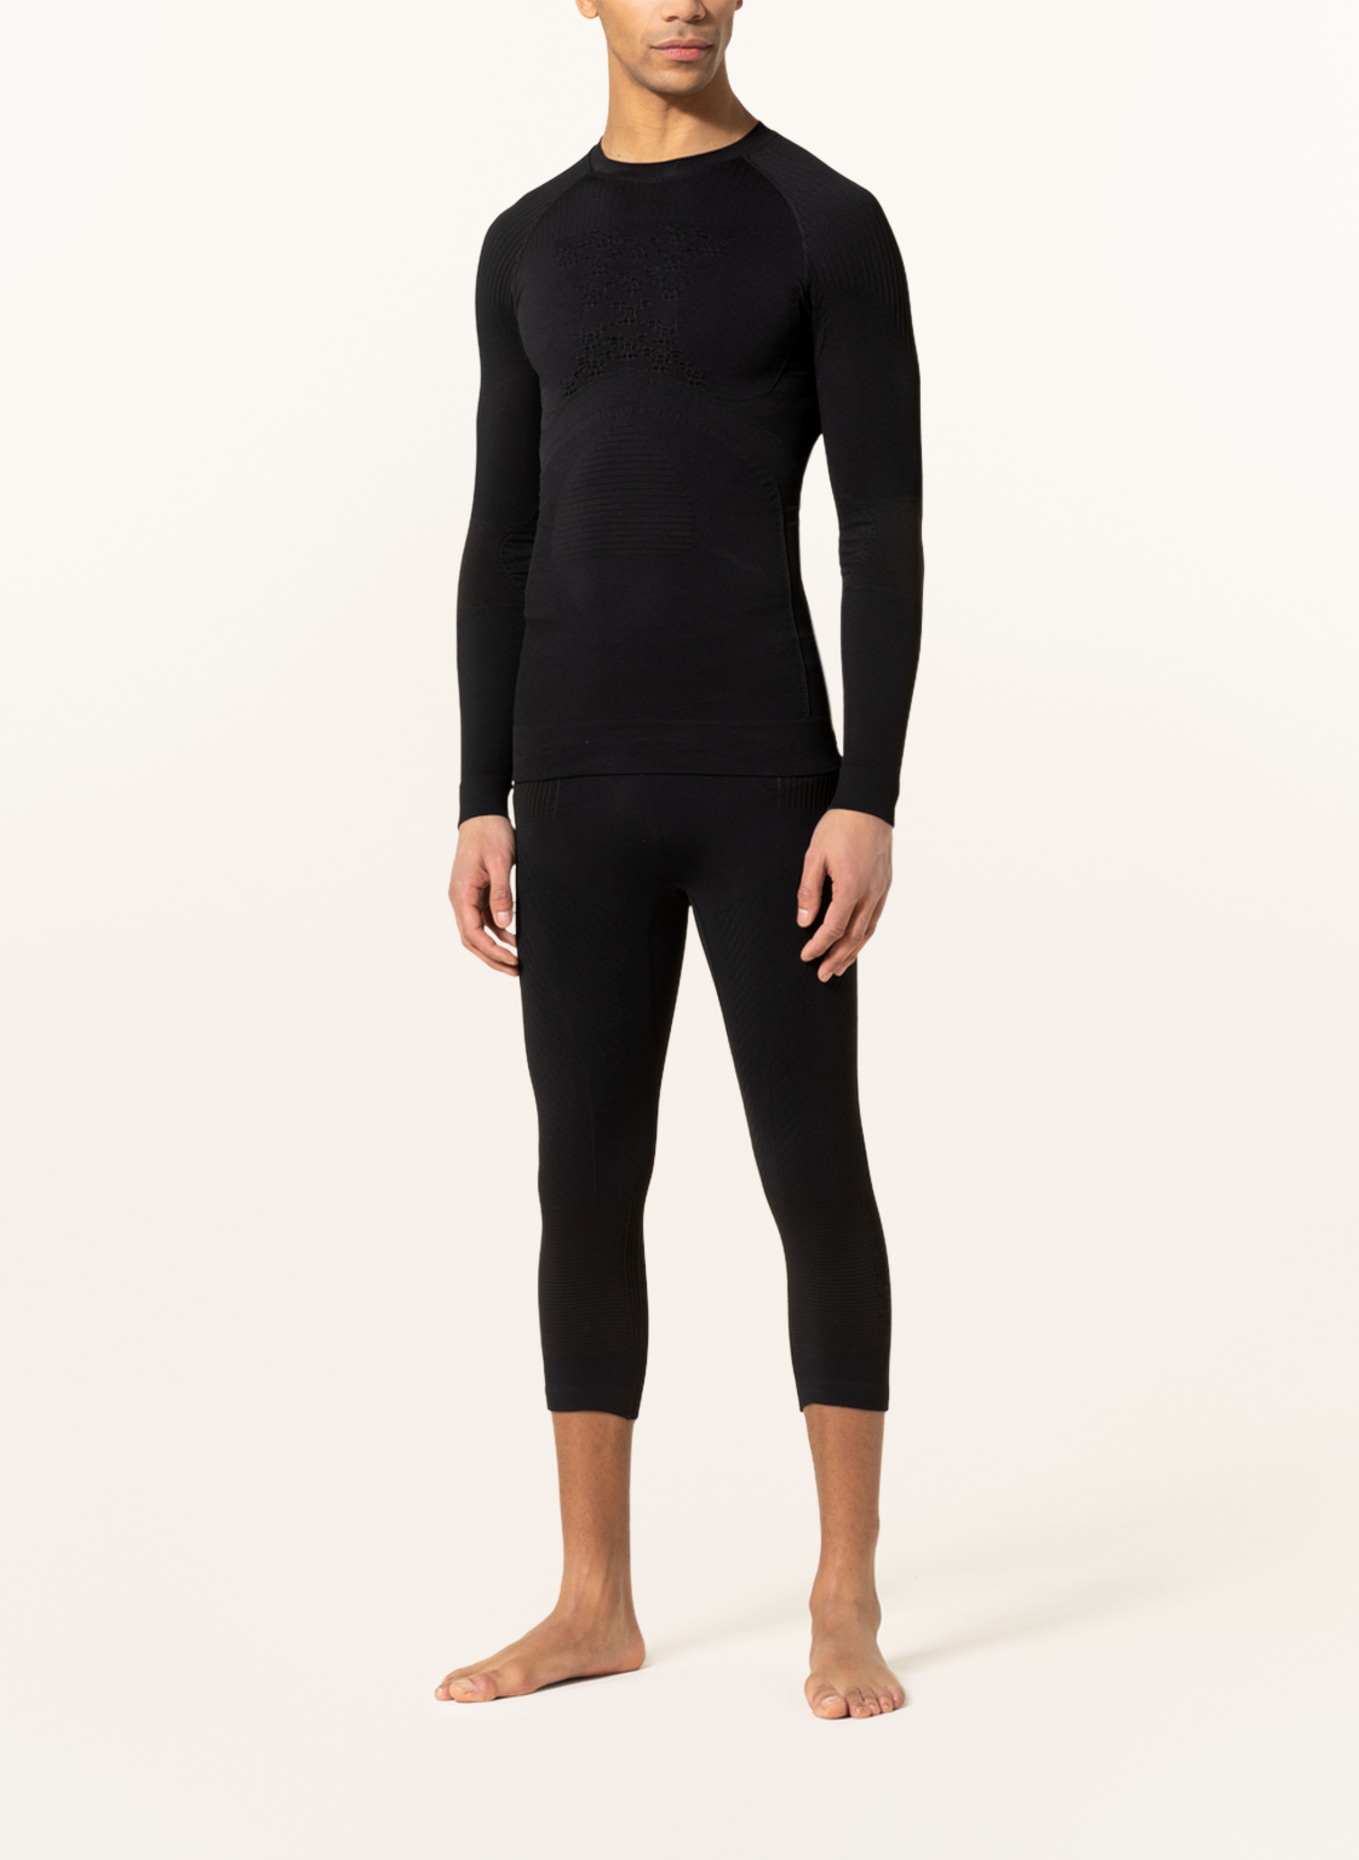 X-BIONIC Functional baselayer trousers ENERGY ACCUMULATOR® 4.0 with cropped leg length, Color: BLACK (Image 2)